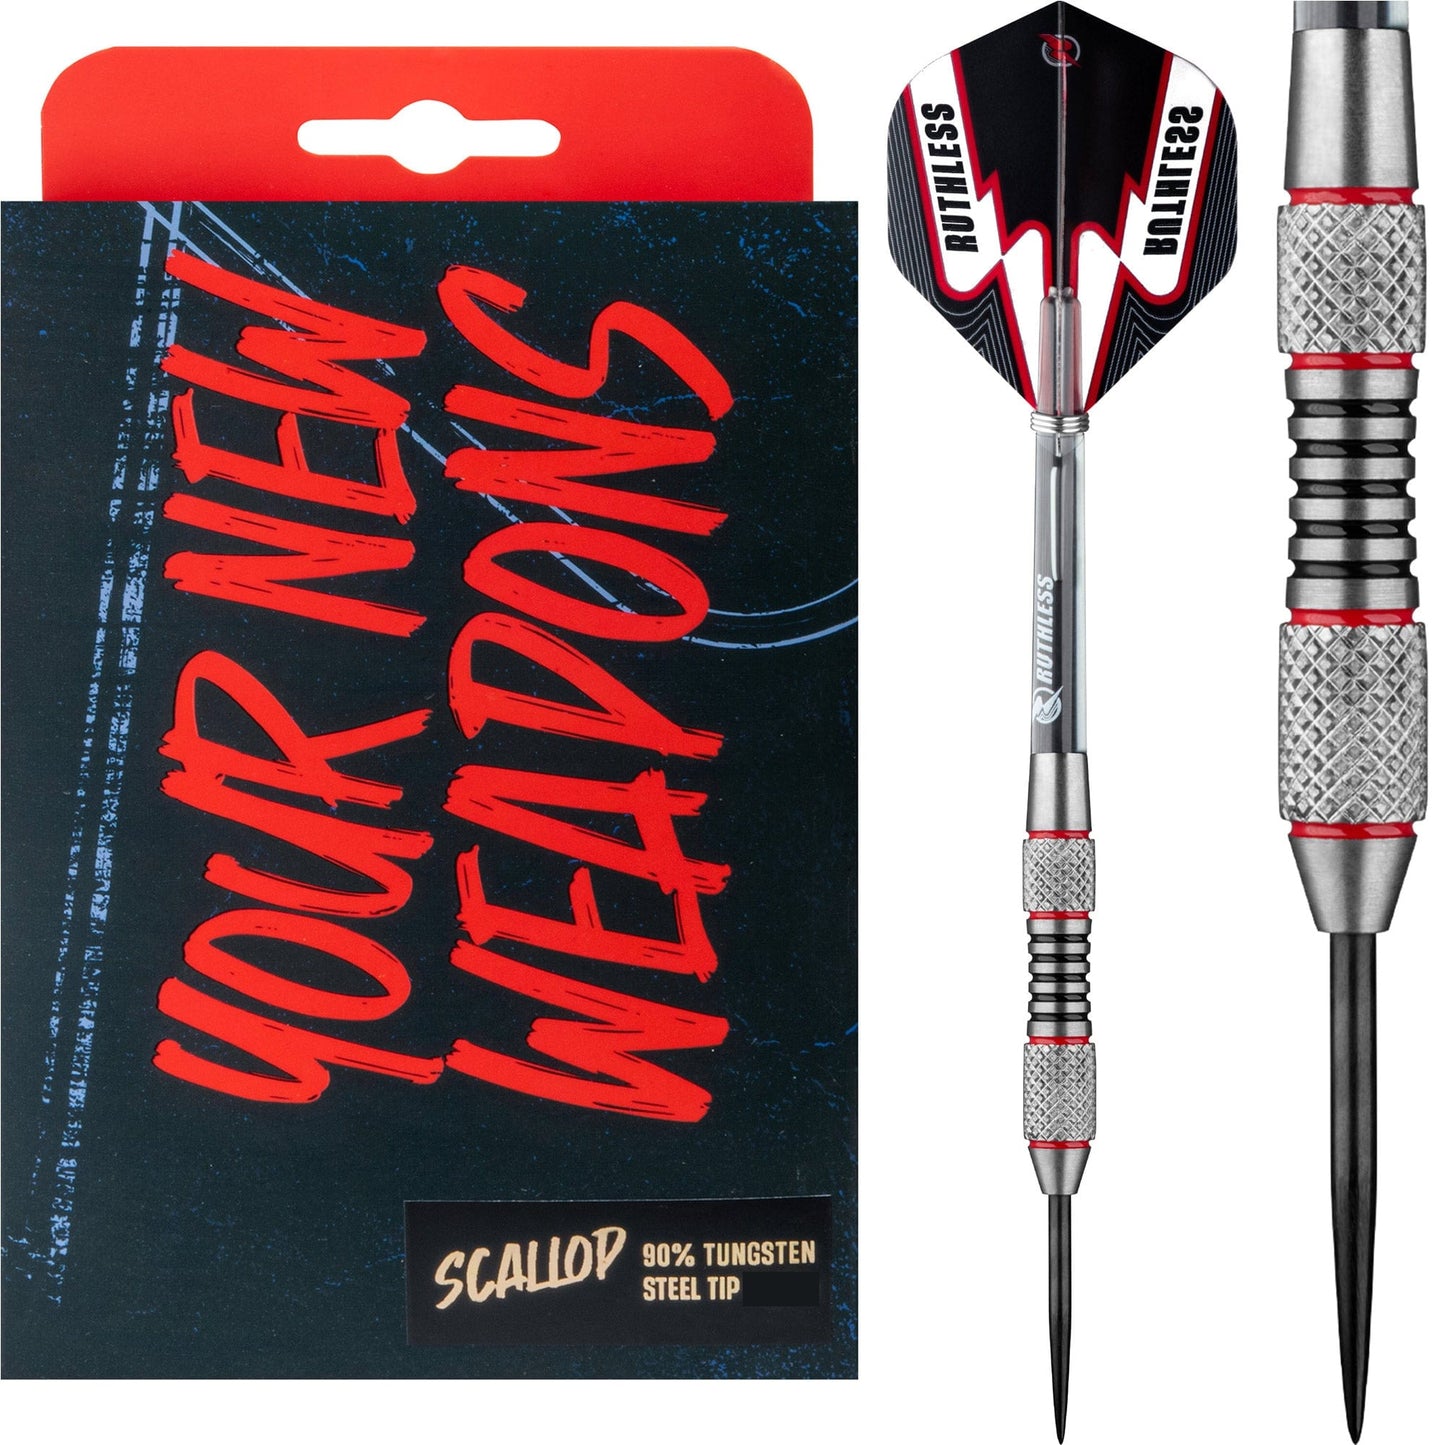 Ruthless Scallop Darts - Steel Tip - Twin Knurl - Black & Red - 21g 21g